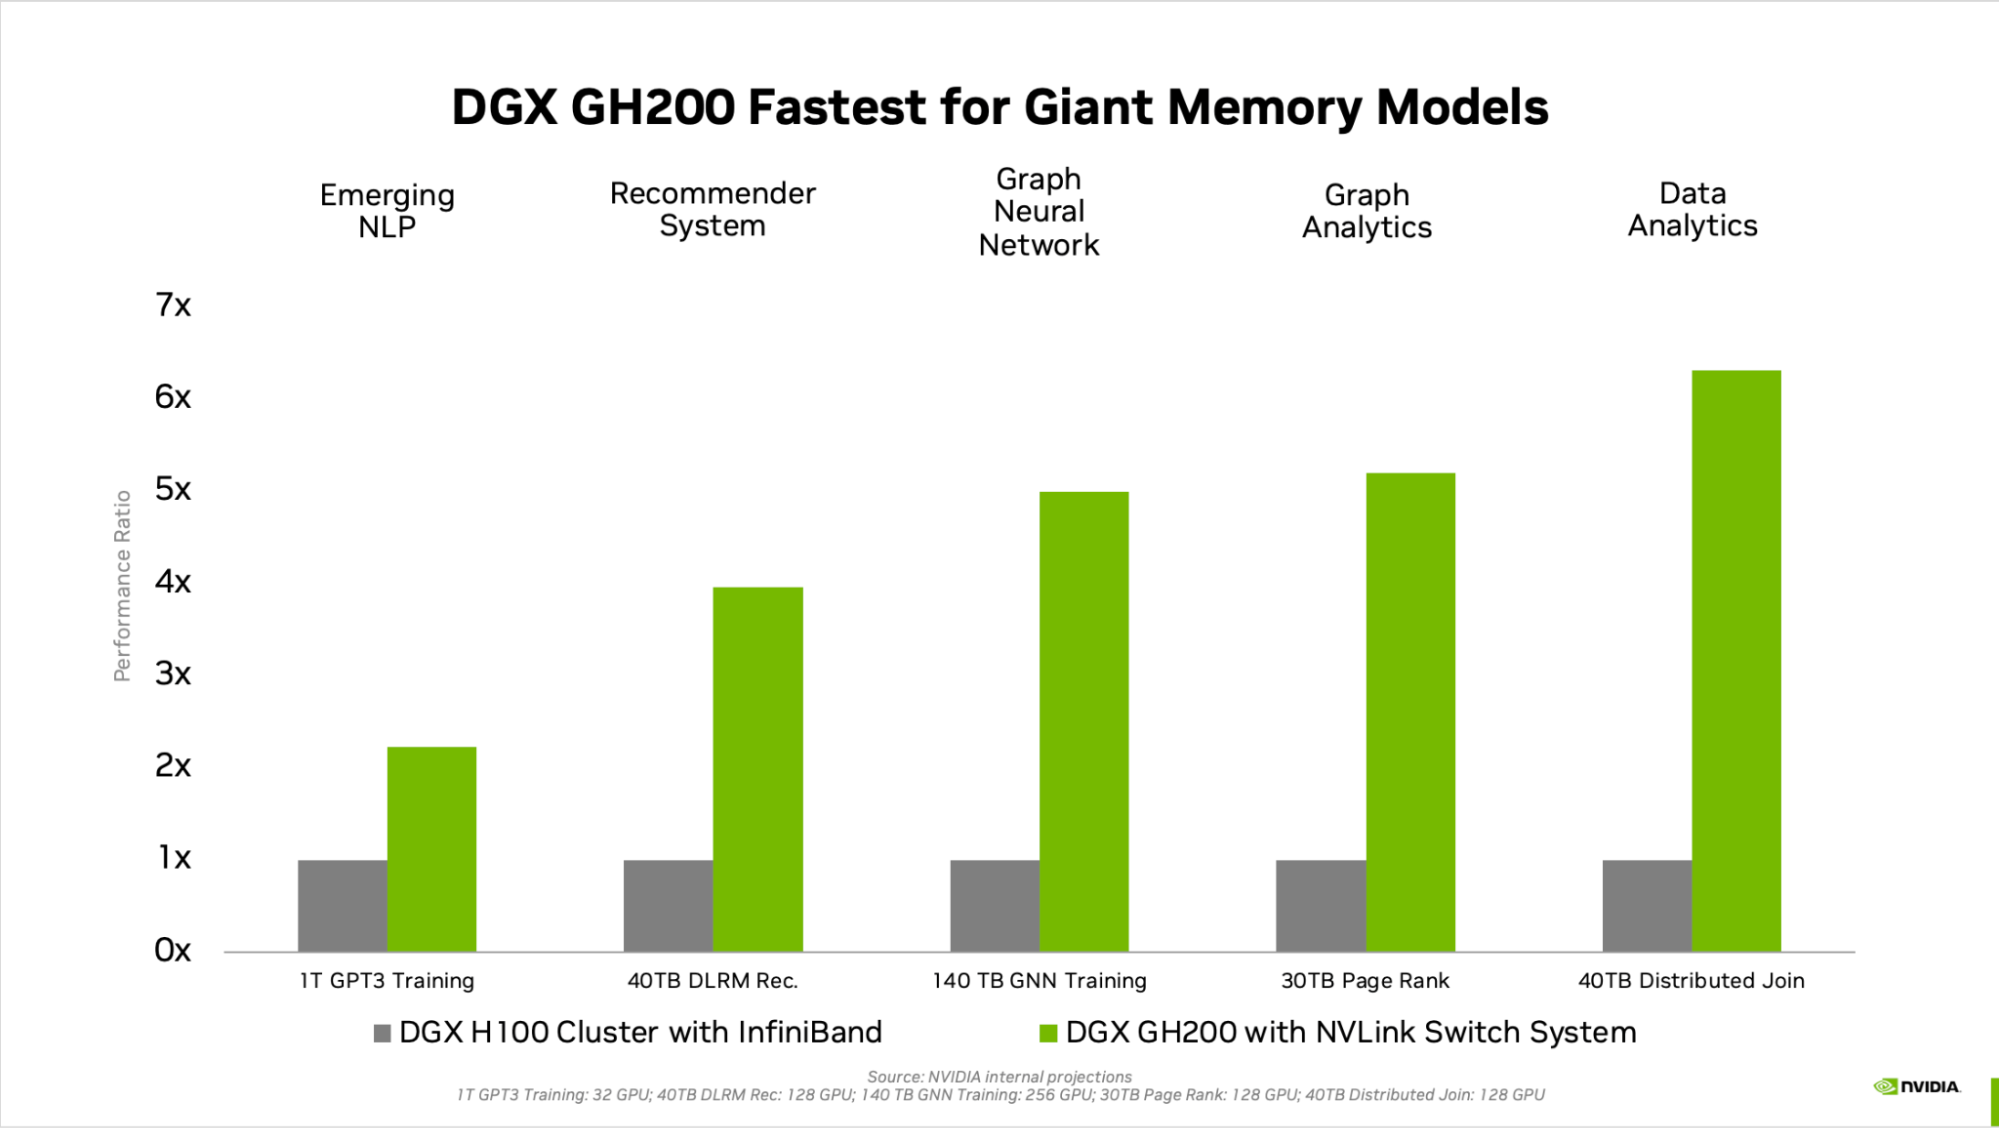 Bar graph compares the performance gains between an NVIDIA DGX H100 Cluster with NVIDIA InfiniBand and an NVIDIA DGX GH200 with NVLink Switch System when applied to large AI models that impose giant memory demands for particular workloads, including emerging NLP, larger recommender systems, graph neural networks, graph analytics and data analytics workloads.